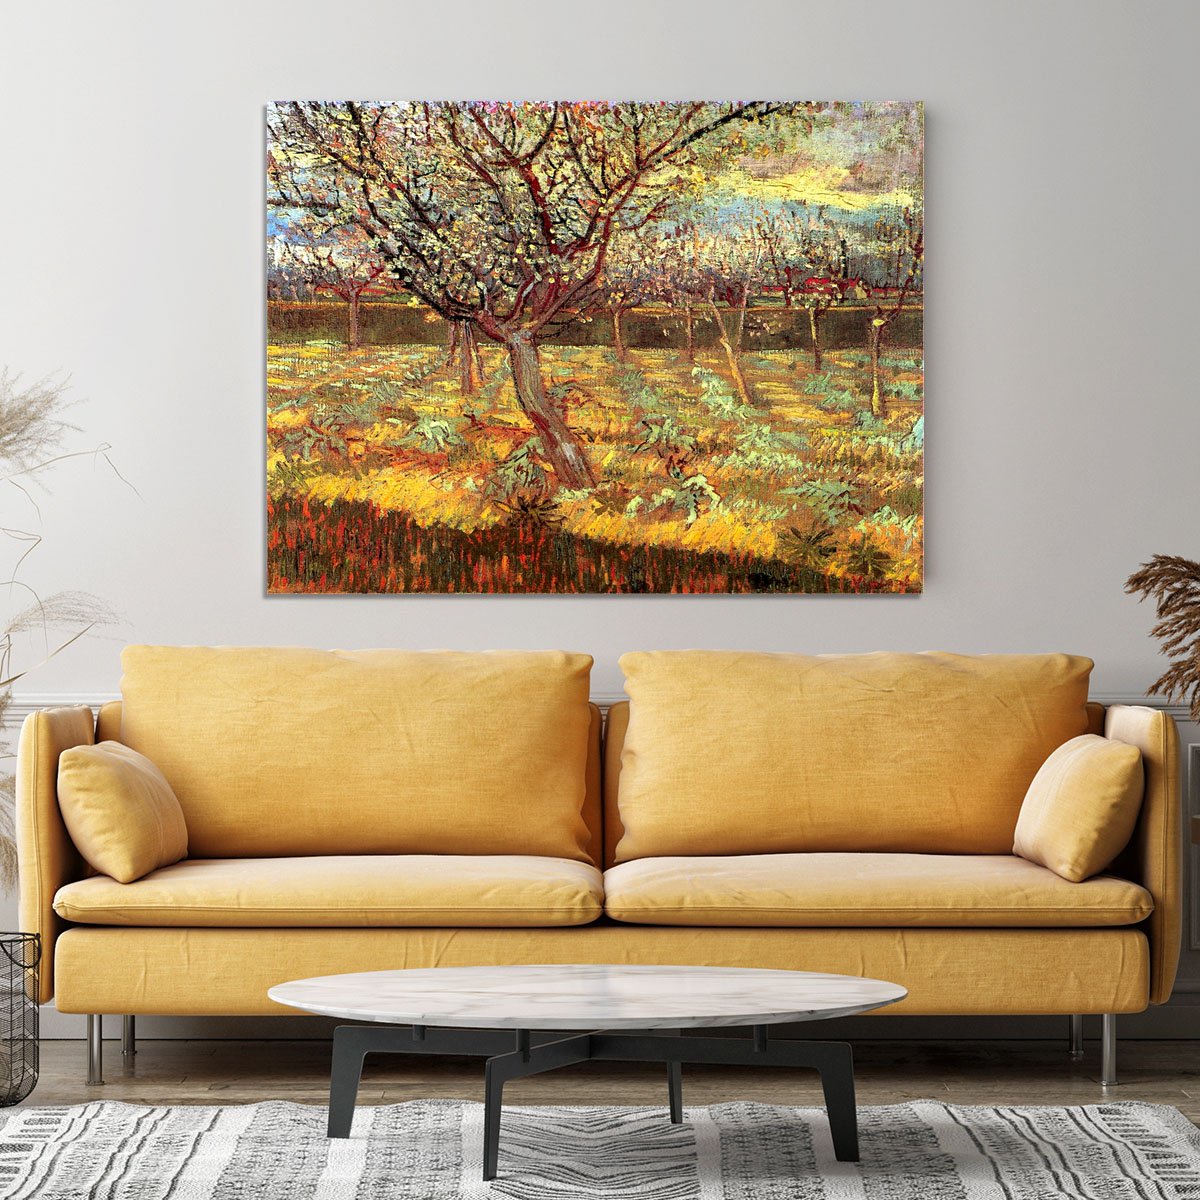 Apricot Trees in Blossom by Van Gogh Canvas Print or Poster